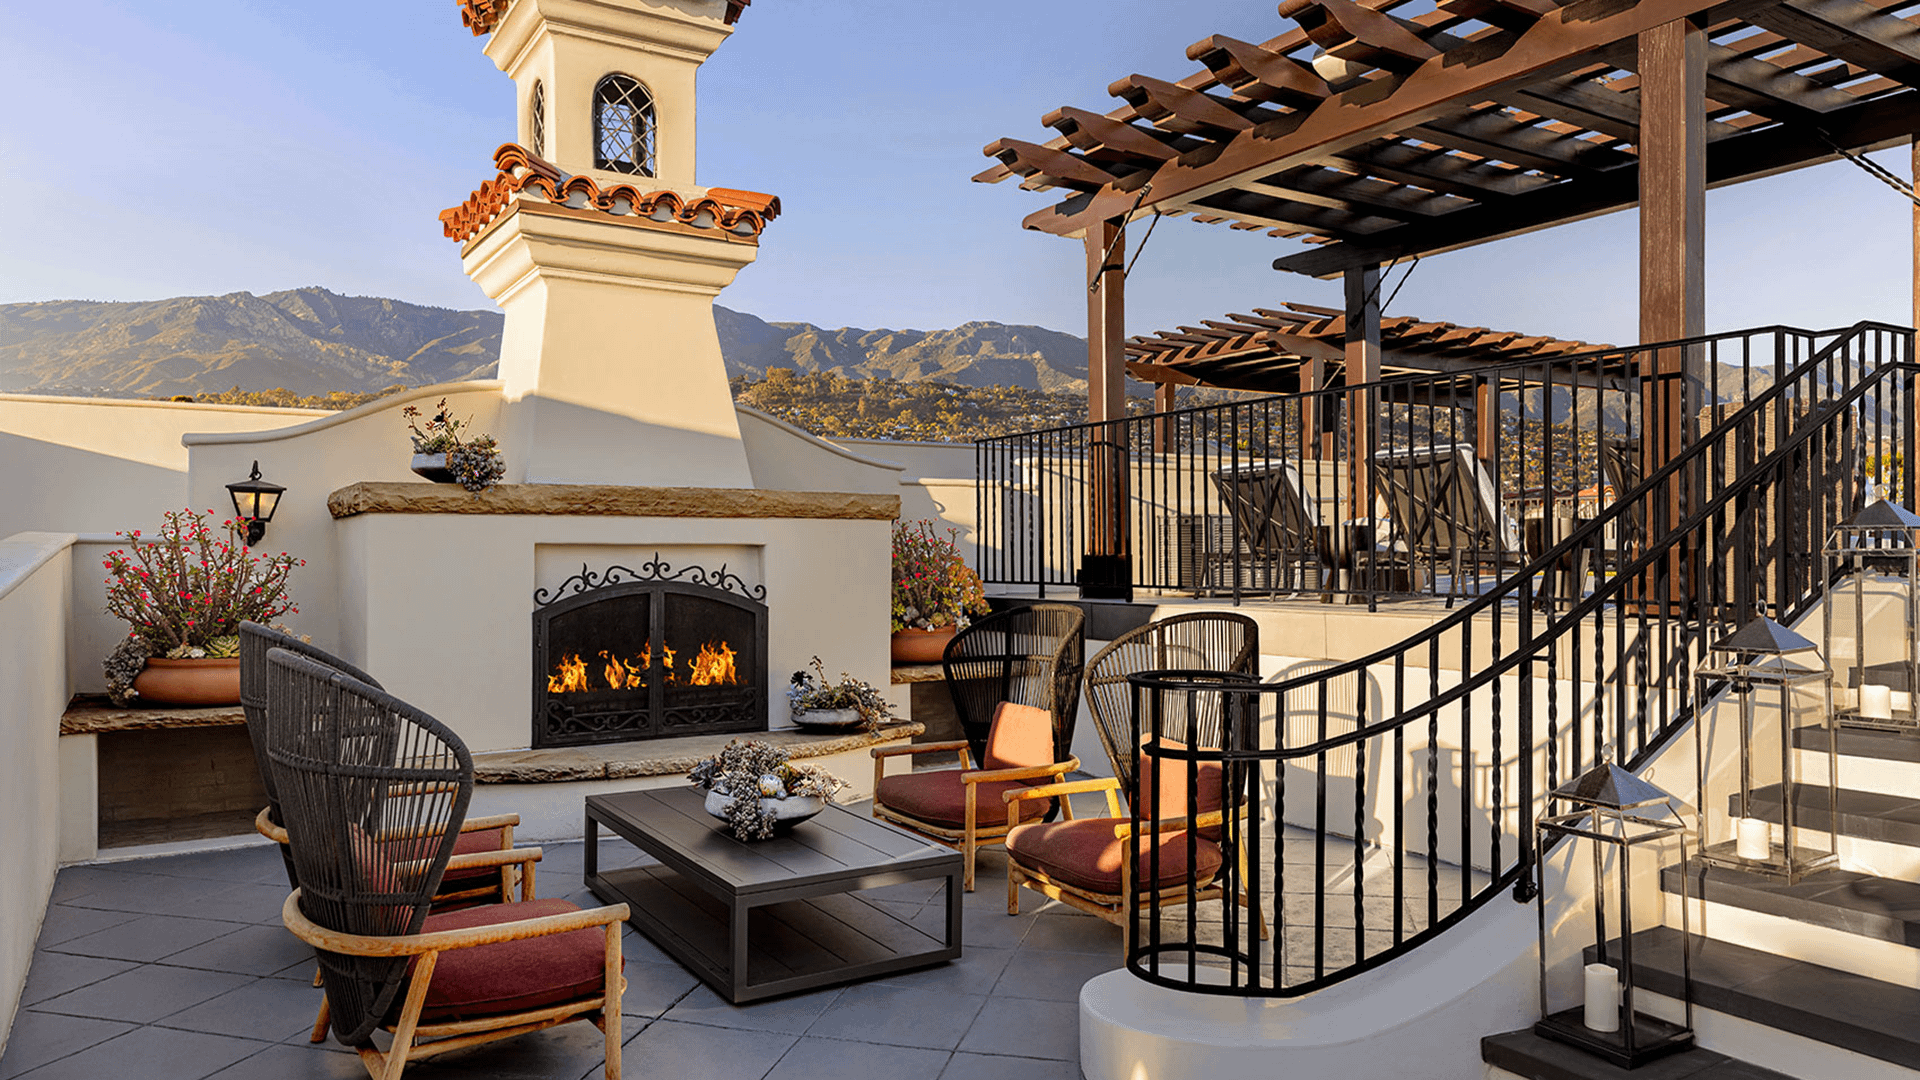 Kimpton Canary Hotel, rooftop pool and fireplace, SB, Photo Courtesy of Kimpton Canary Hotel